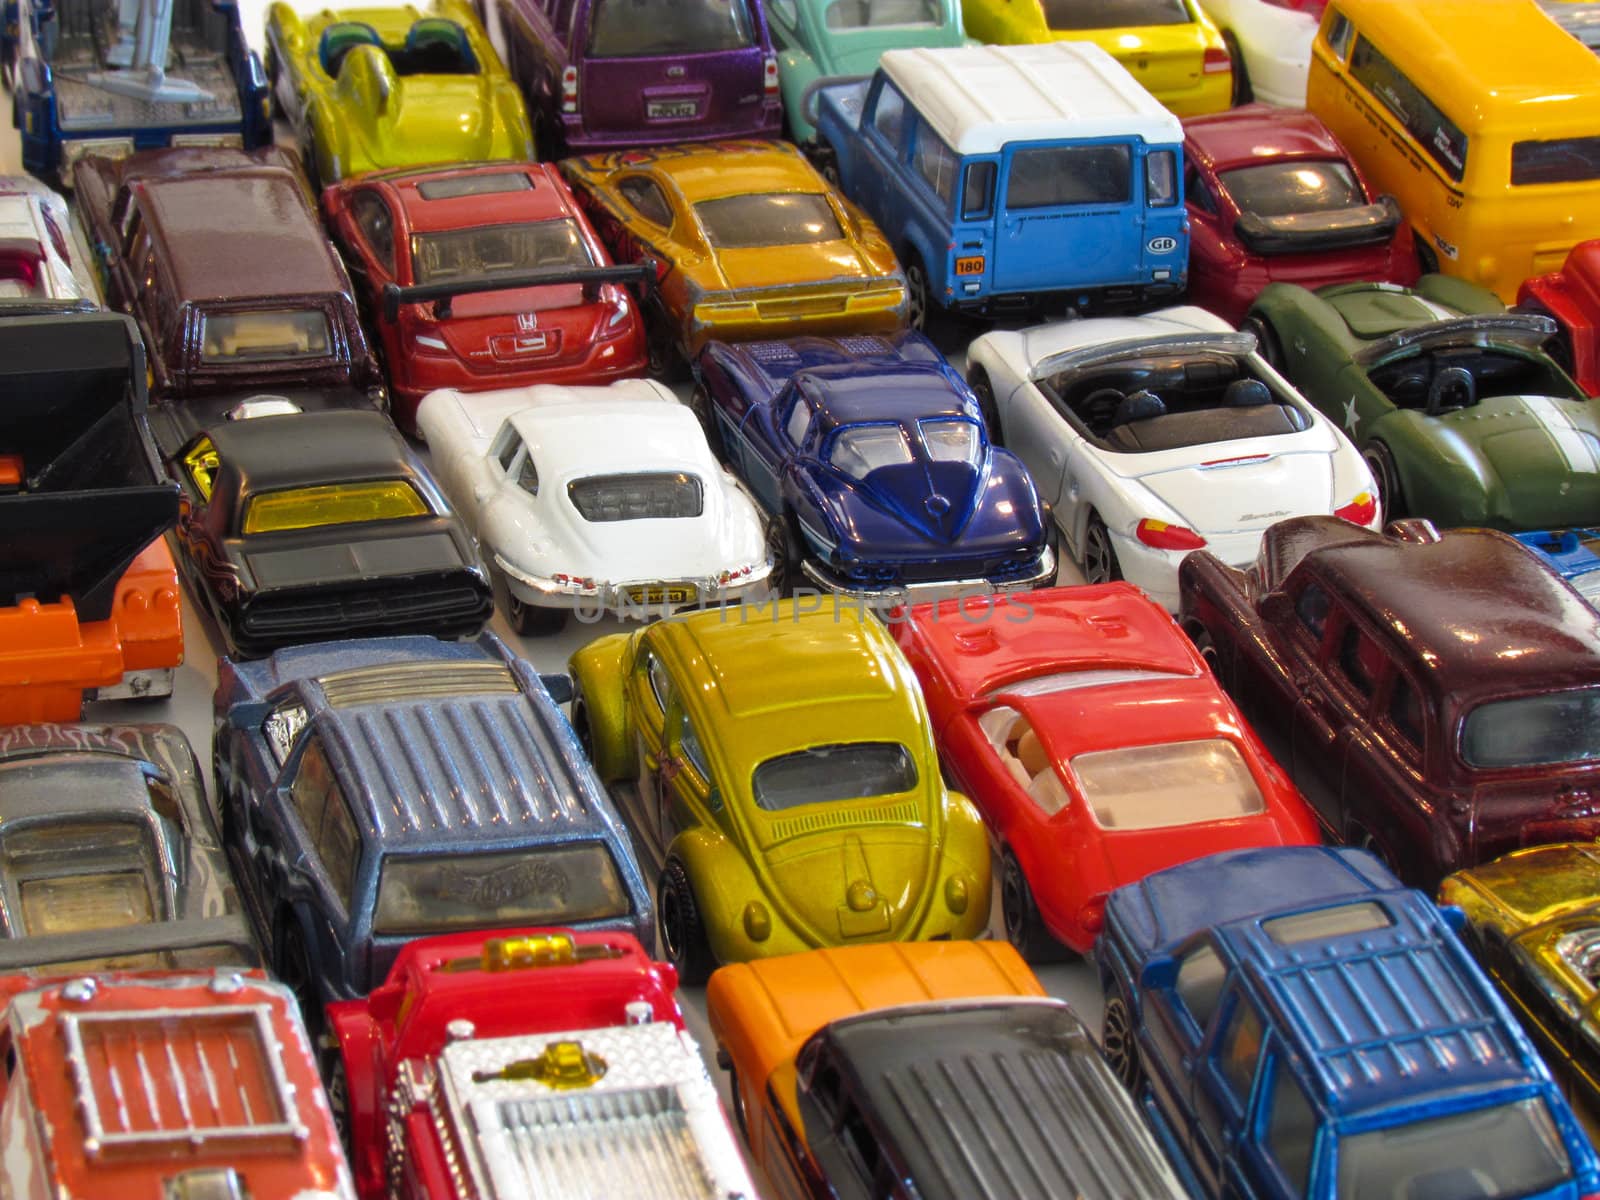 traffic congestion illustrated with toy cars.